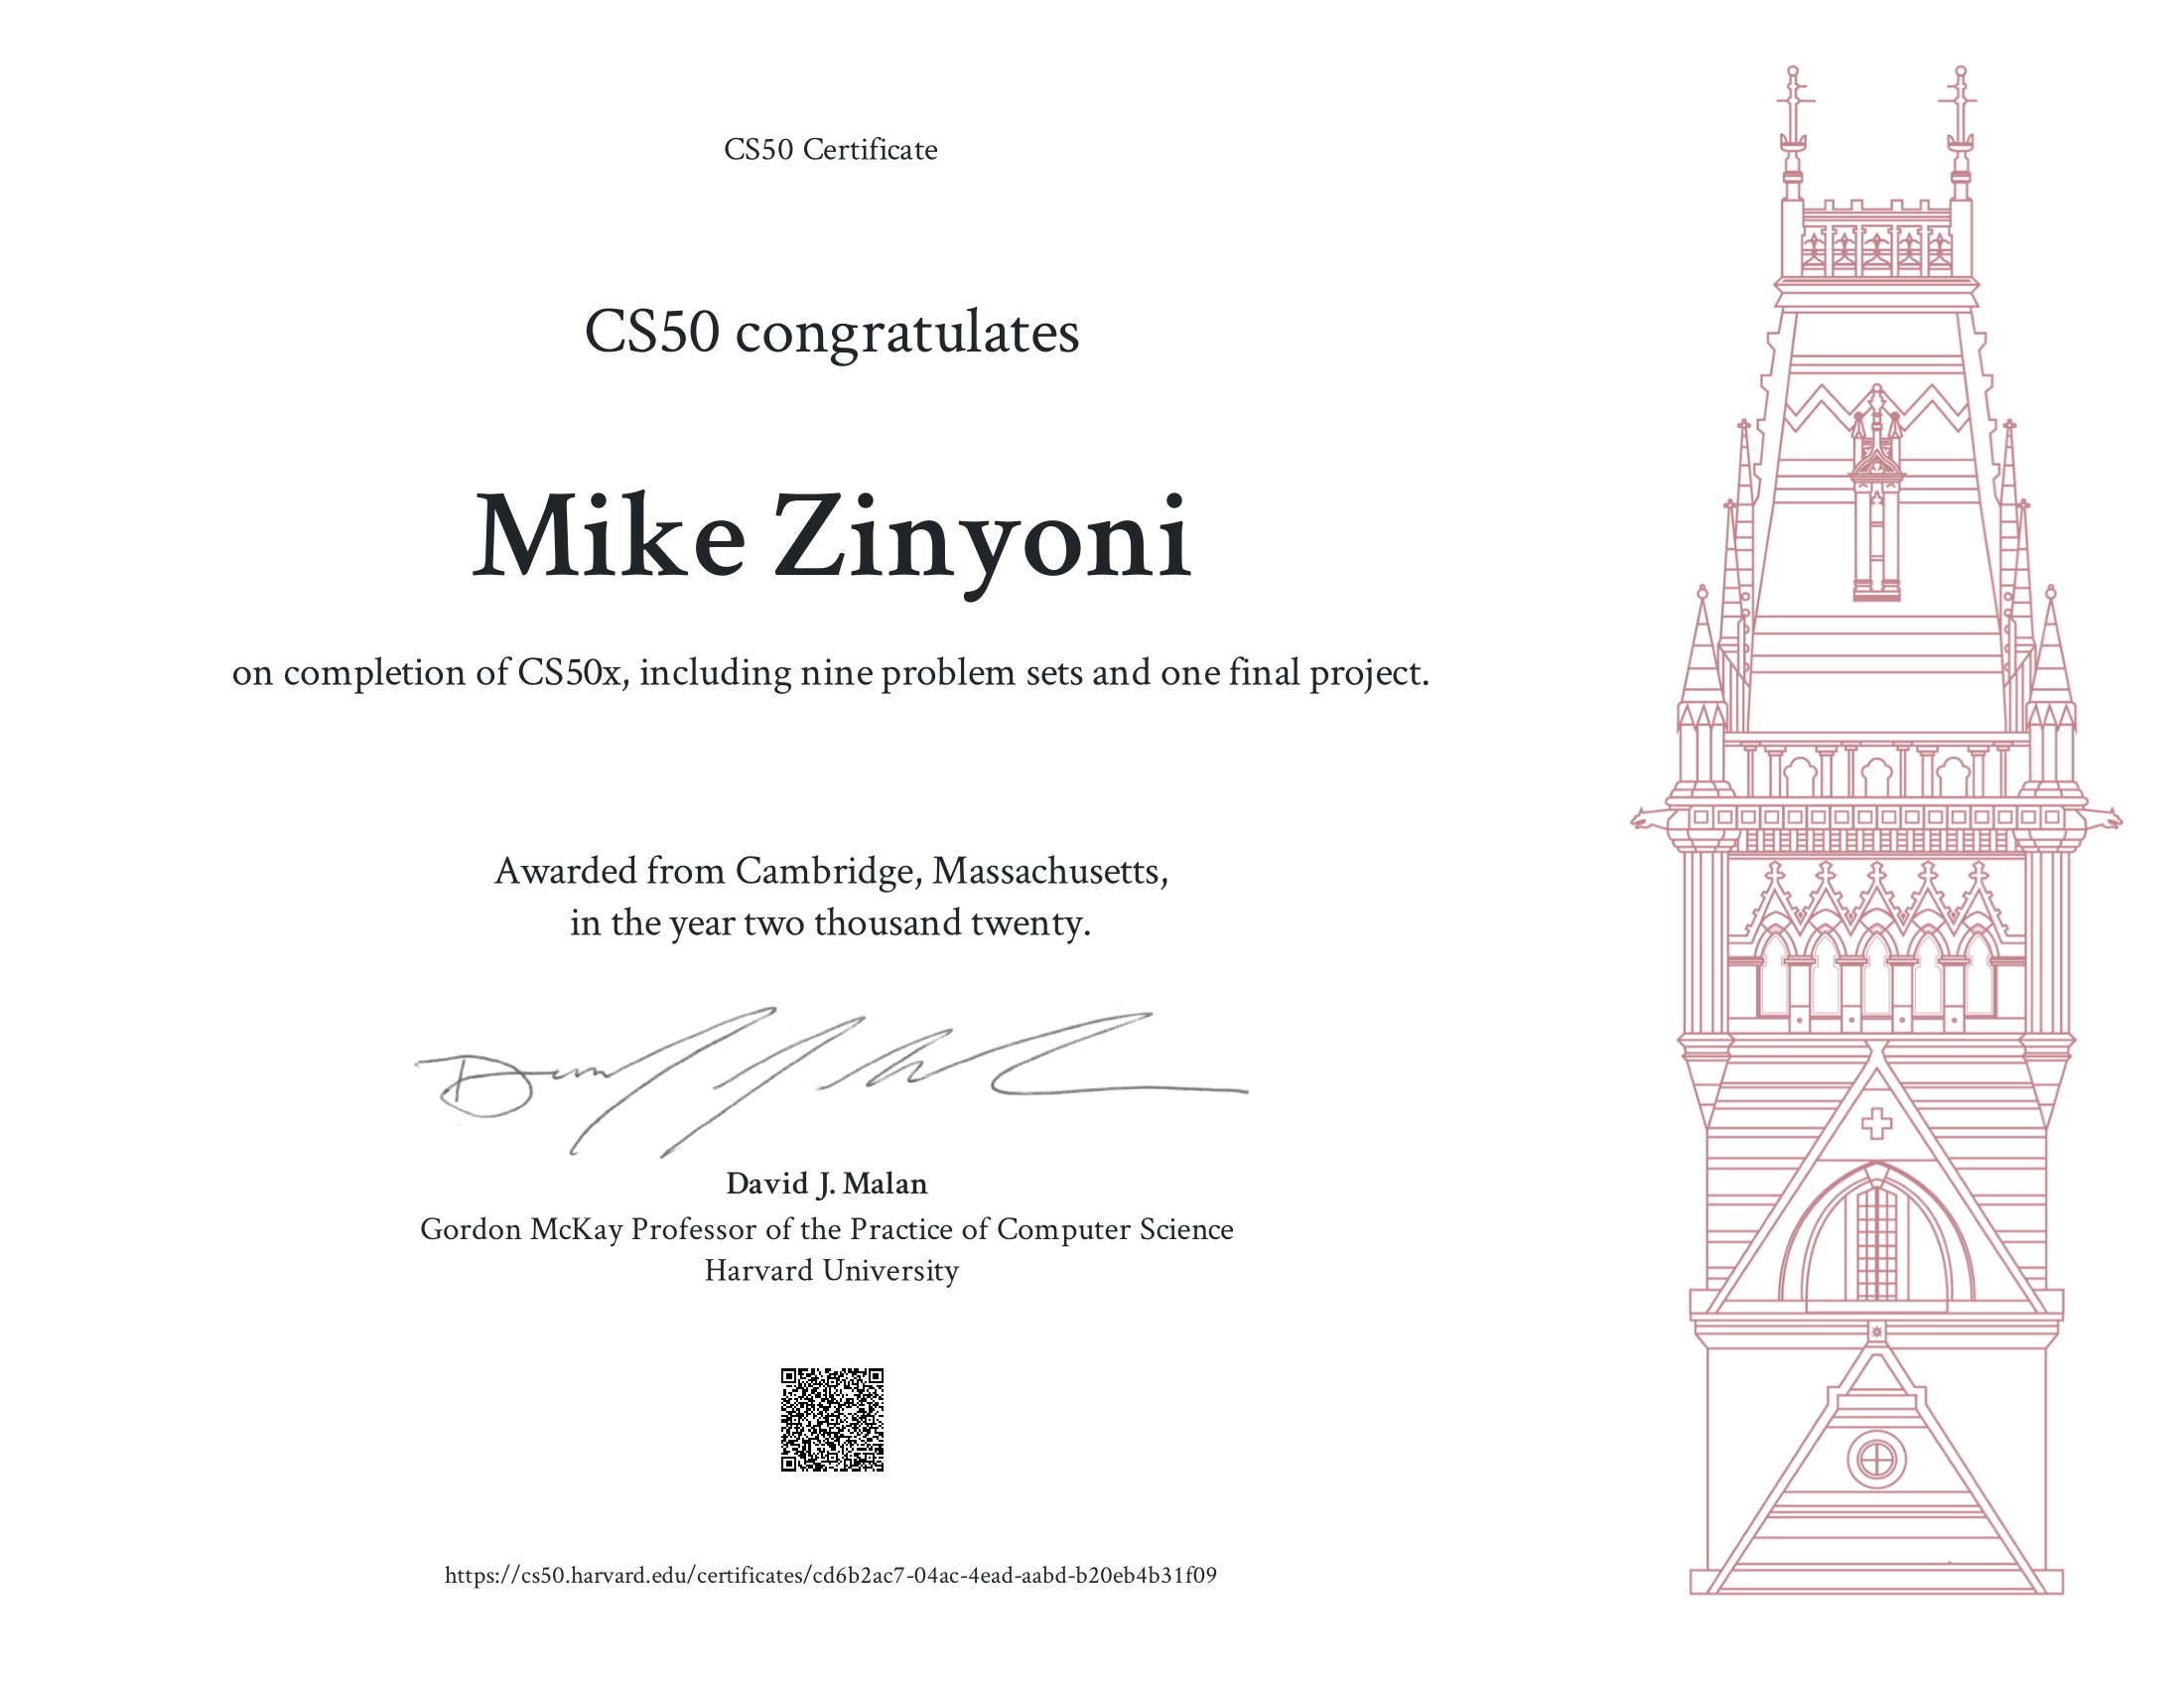 Mike Zinyoni's CS50 Introduction to Computer Science awarded by Harvard University